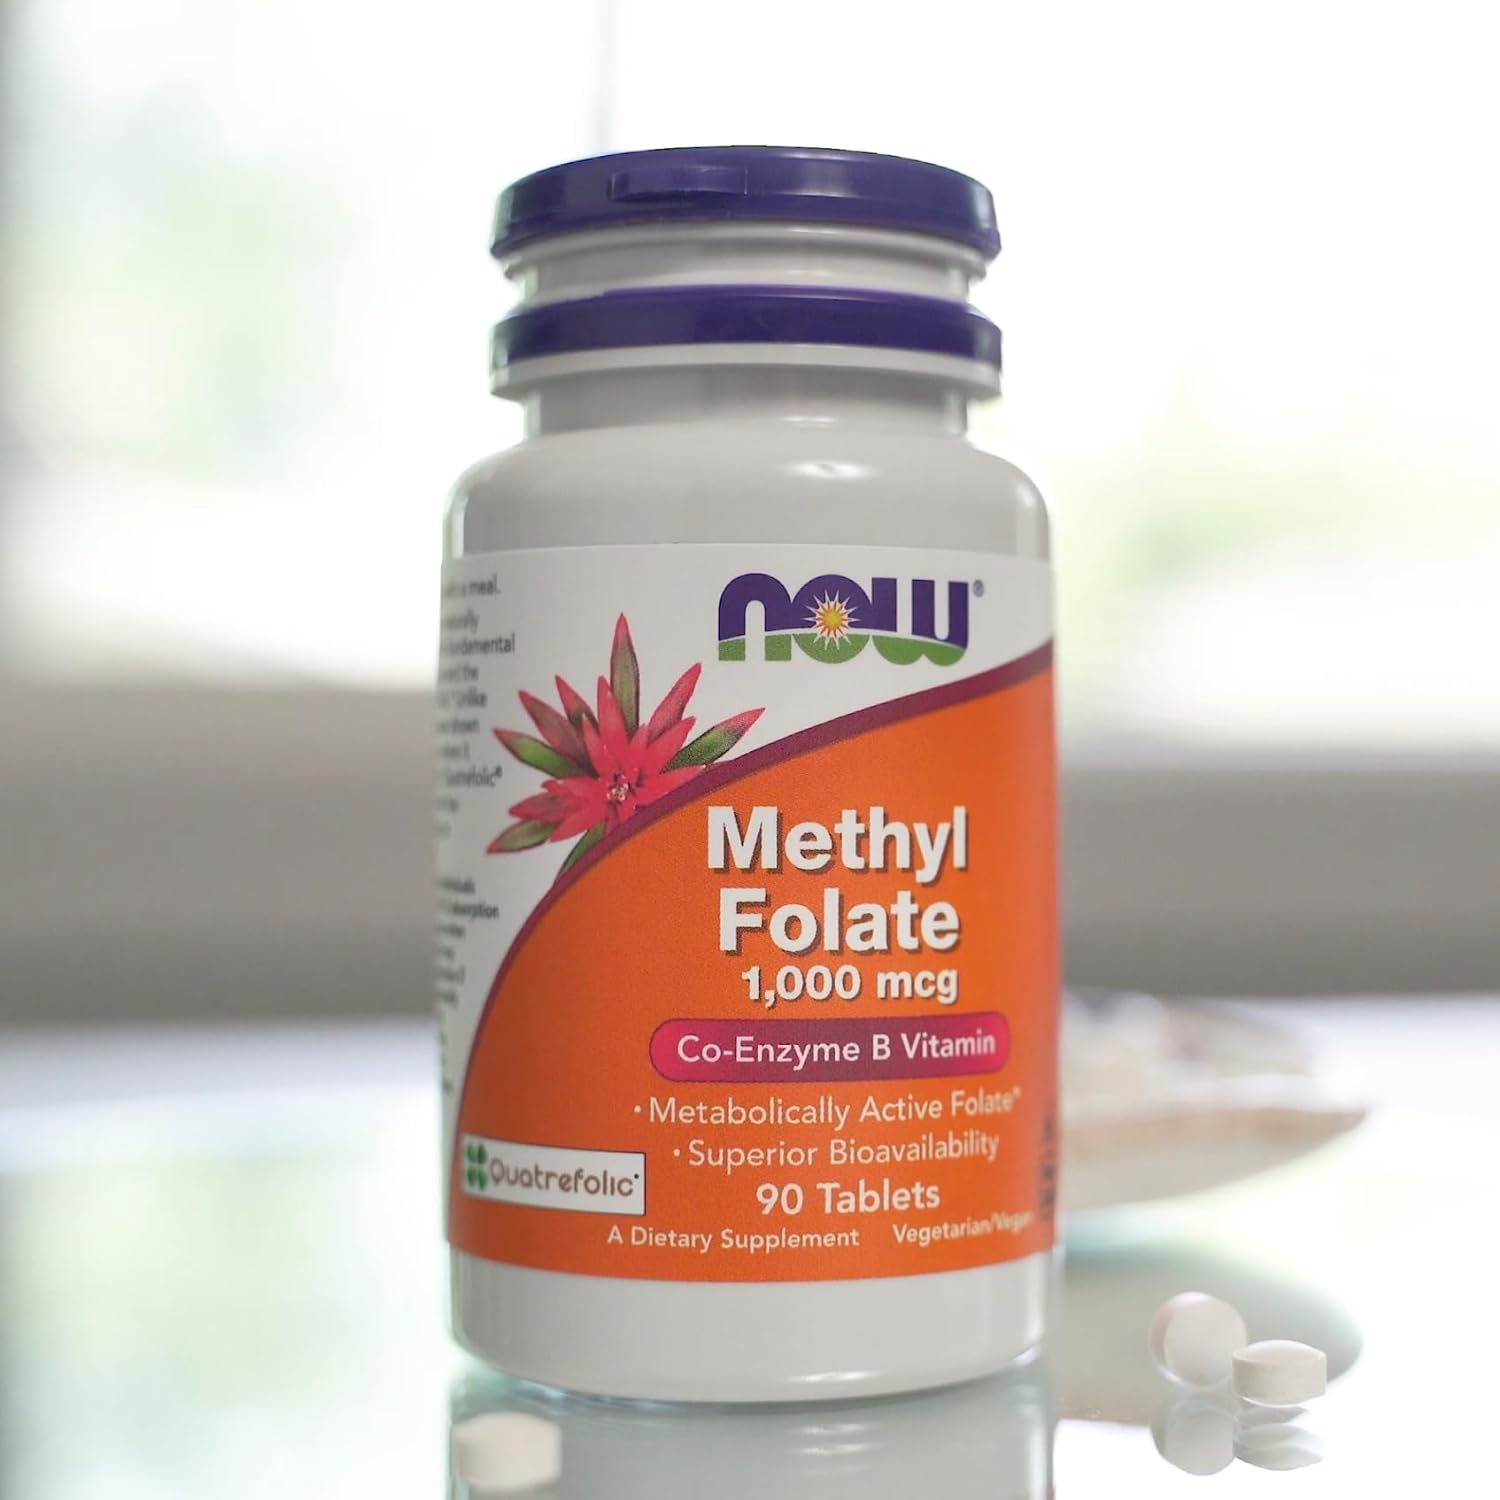 NOW Supplements, Methyl Folate 1,000 mcg, Metabolically Active Folate*, Co-Enzyme B Vitamin, 90 Tablets : Health & Household